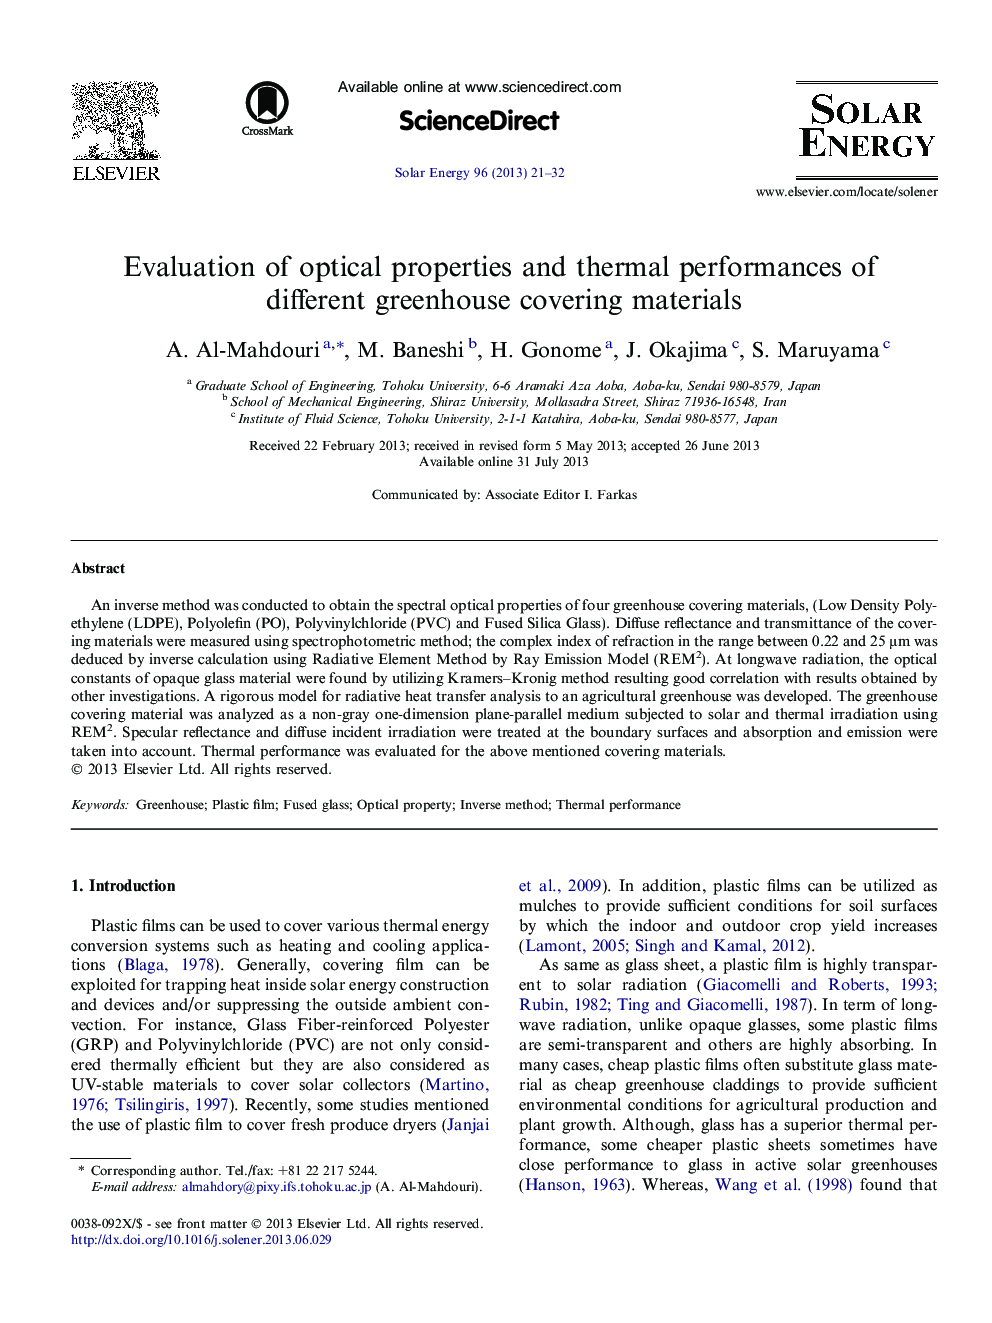 Evaluation of optical properties and thermal performances of different greenhouse covering materials